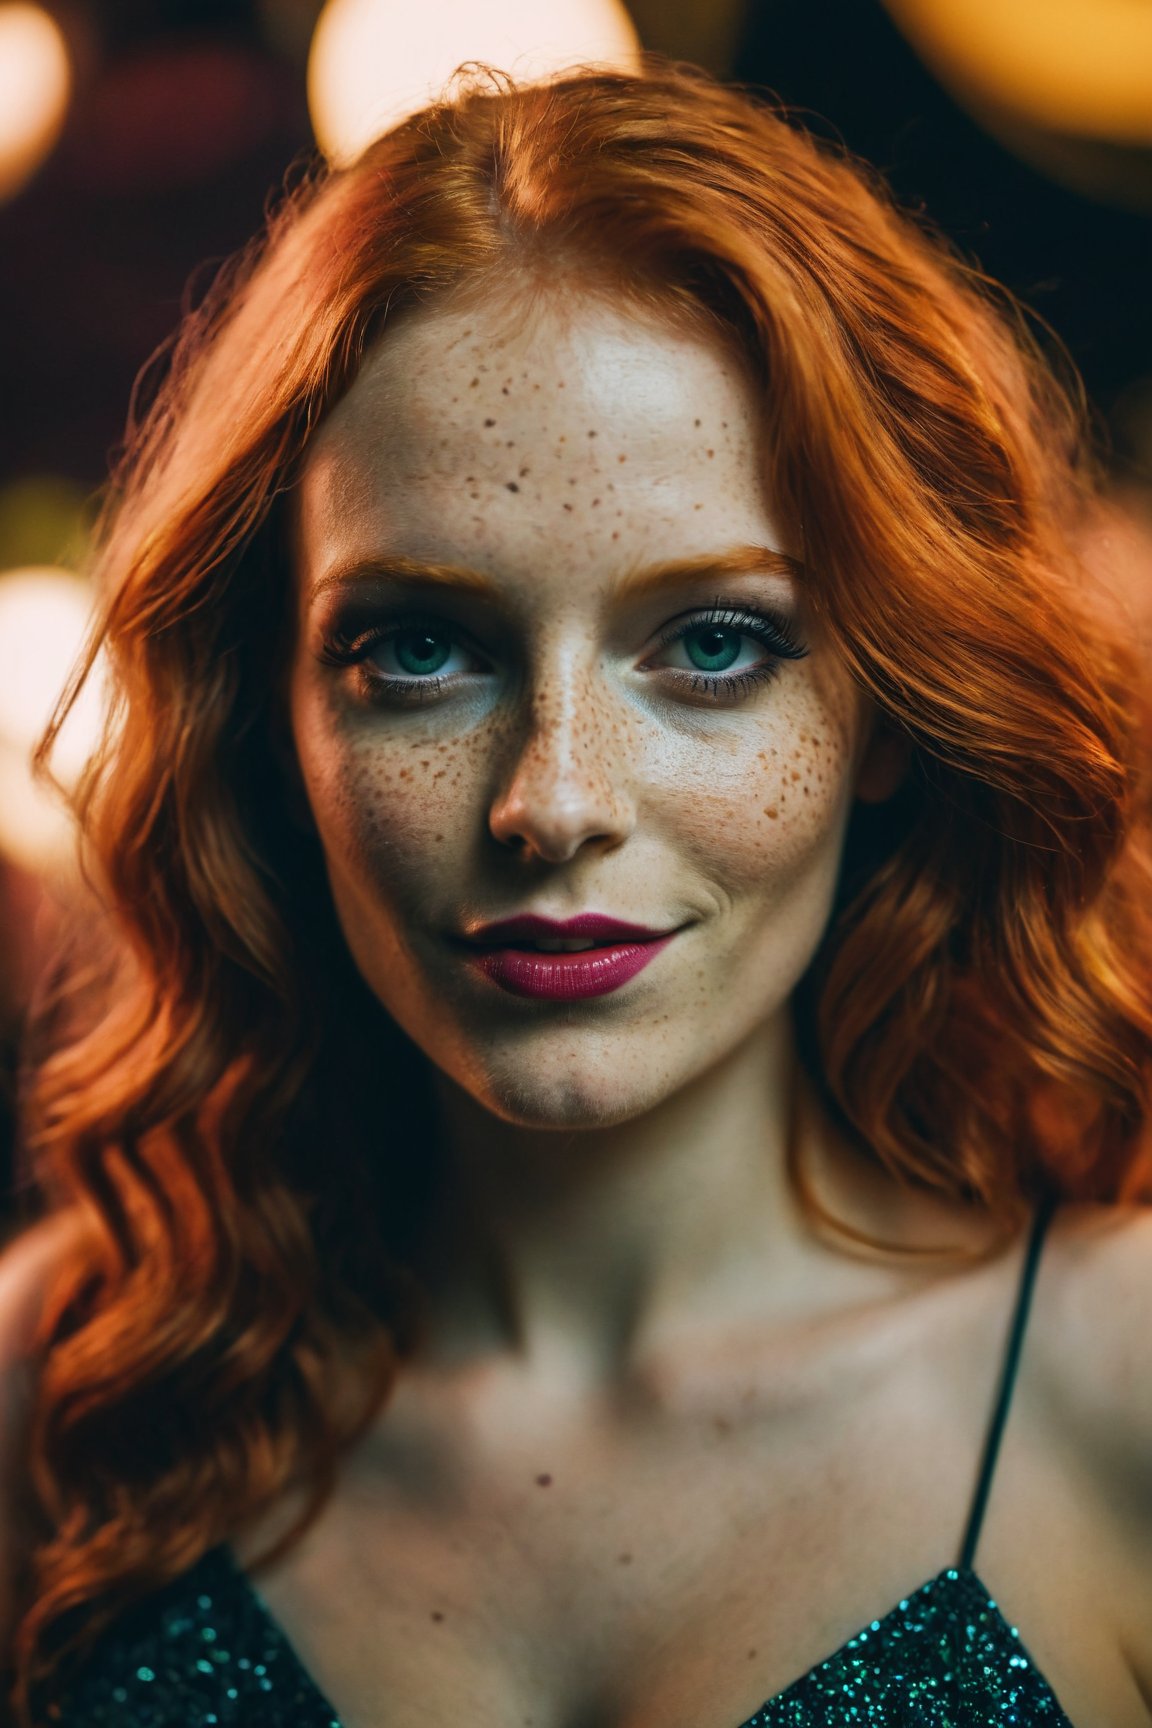 Amateur photography, a stunning redhead, party clothing, nightclub photo, ambient lighting, ecstatic vibe, slightly alternative, very attractive, intricate skin details, deep darks, hyperdetailed photo, instagram filter, low lighting, flash photography, shot on a Samsung Galaxy, rich emotive colors, DSLR